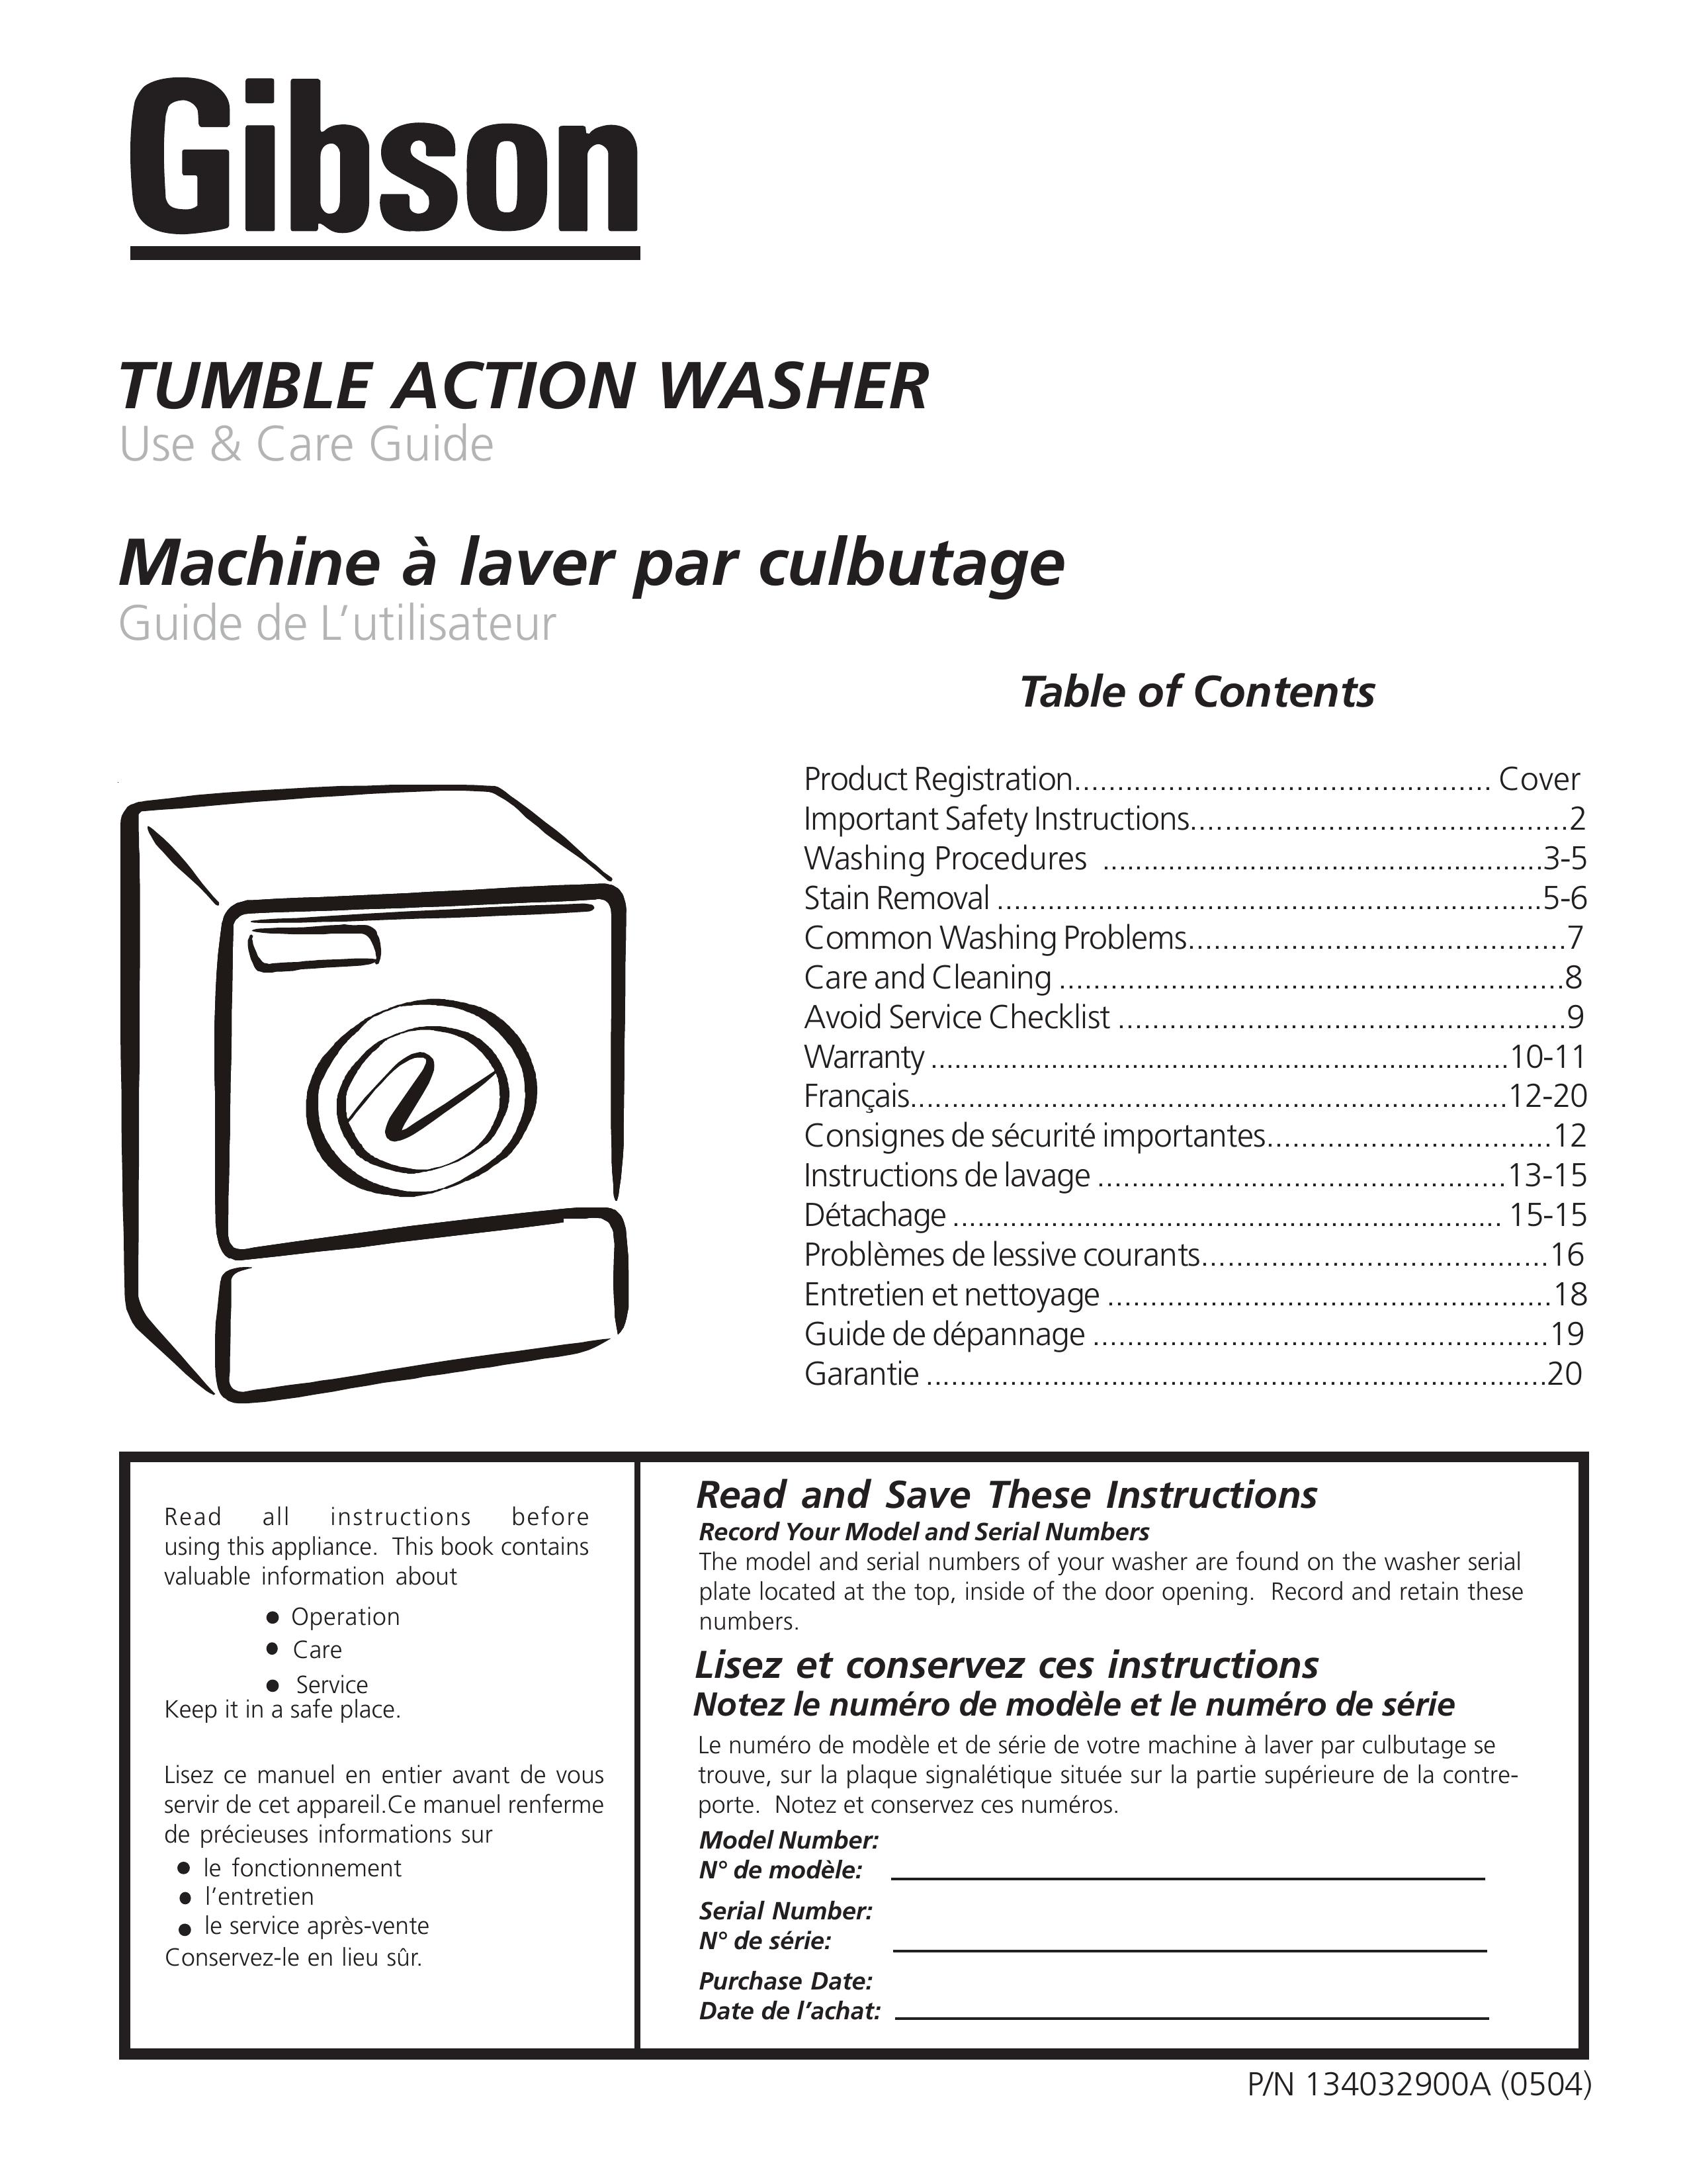 Electrolux - Gibson 134032900A Washer User Manual